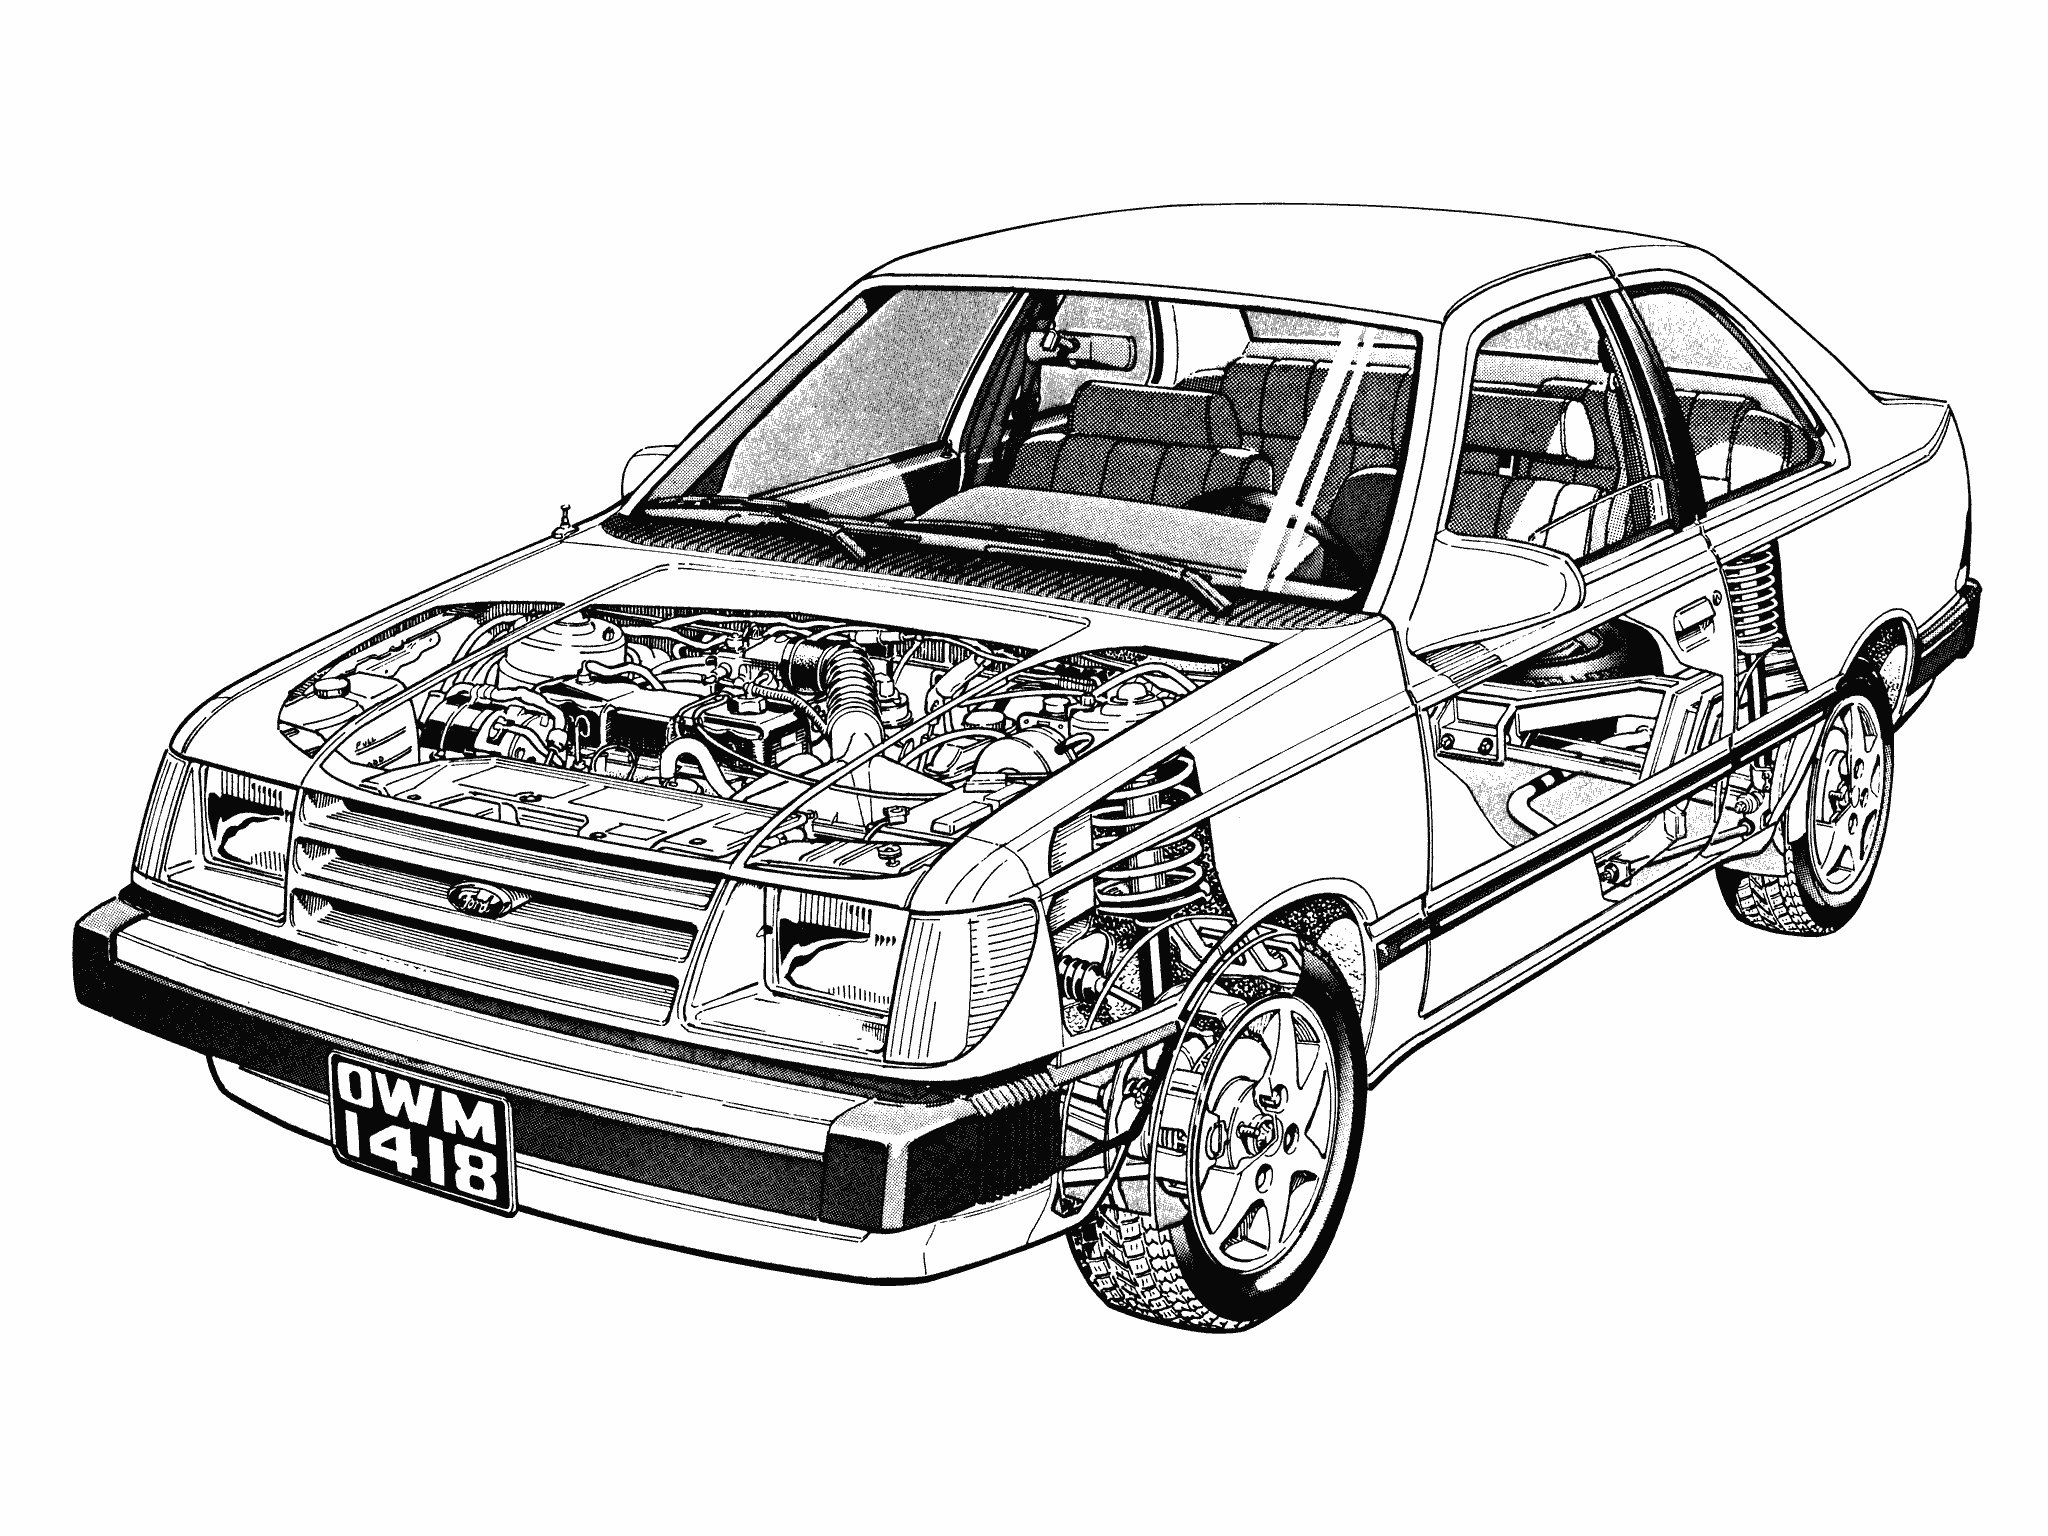 Ford Tempo cutaway drawing